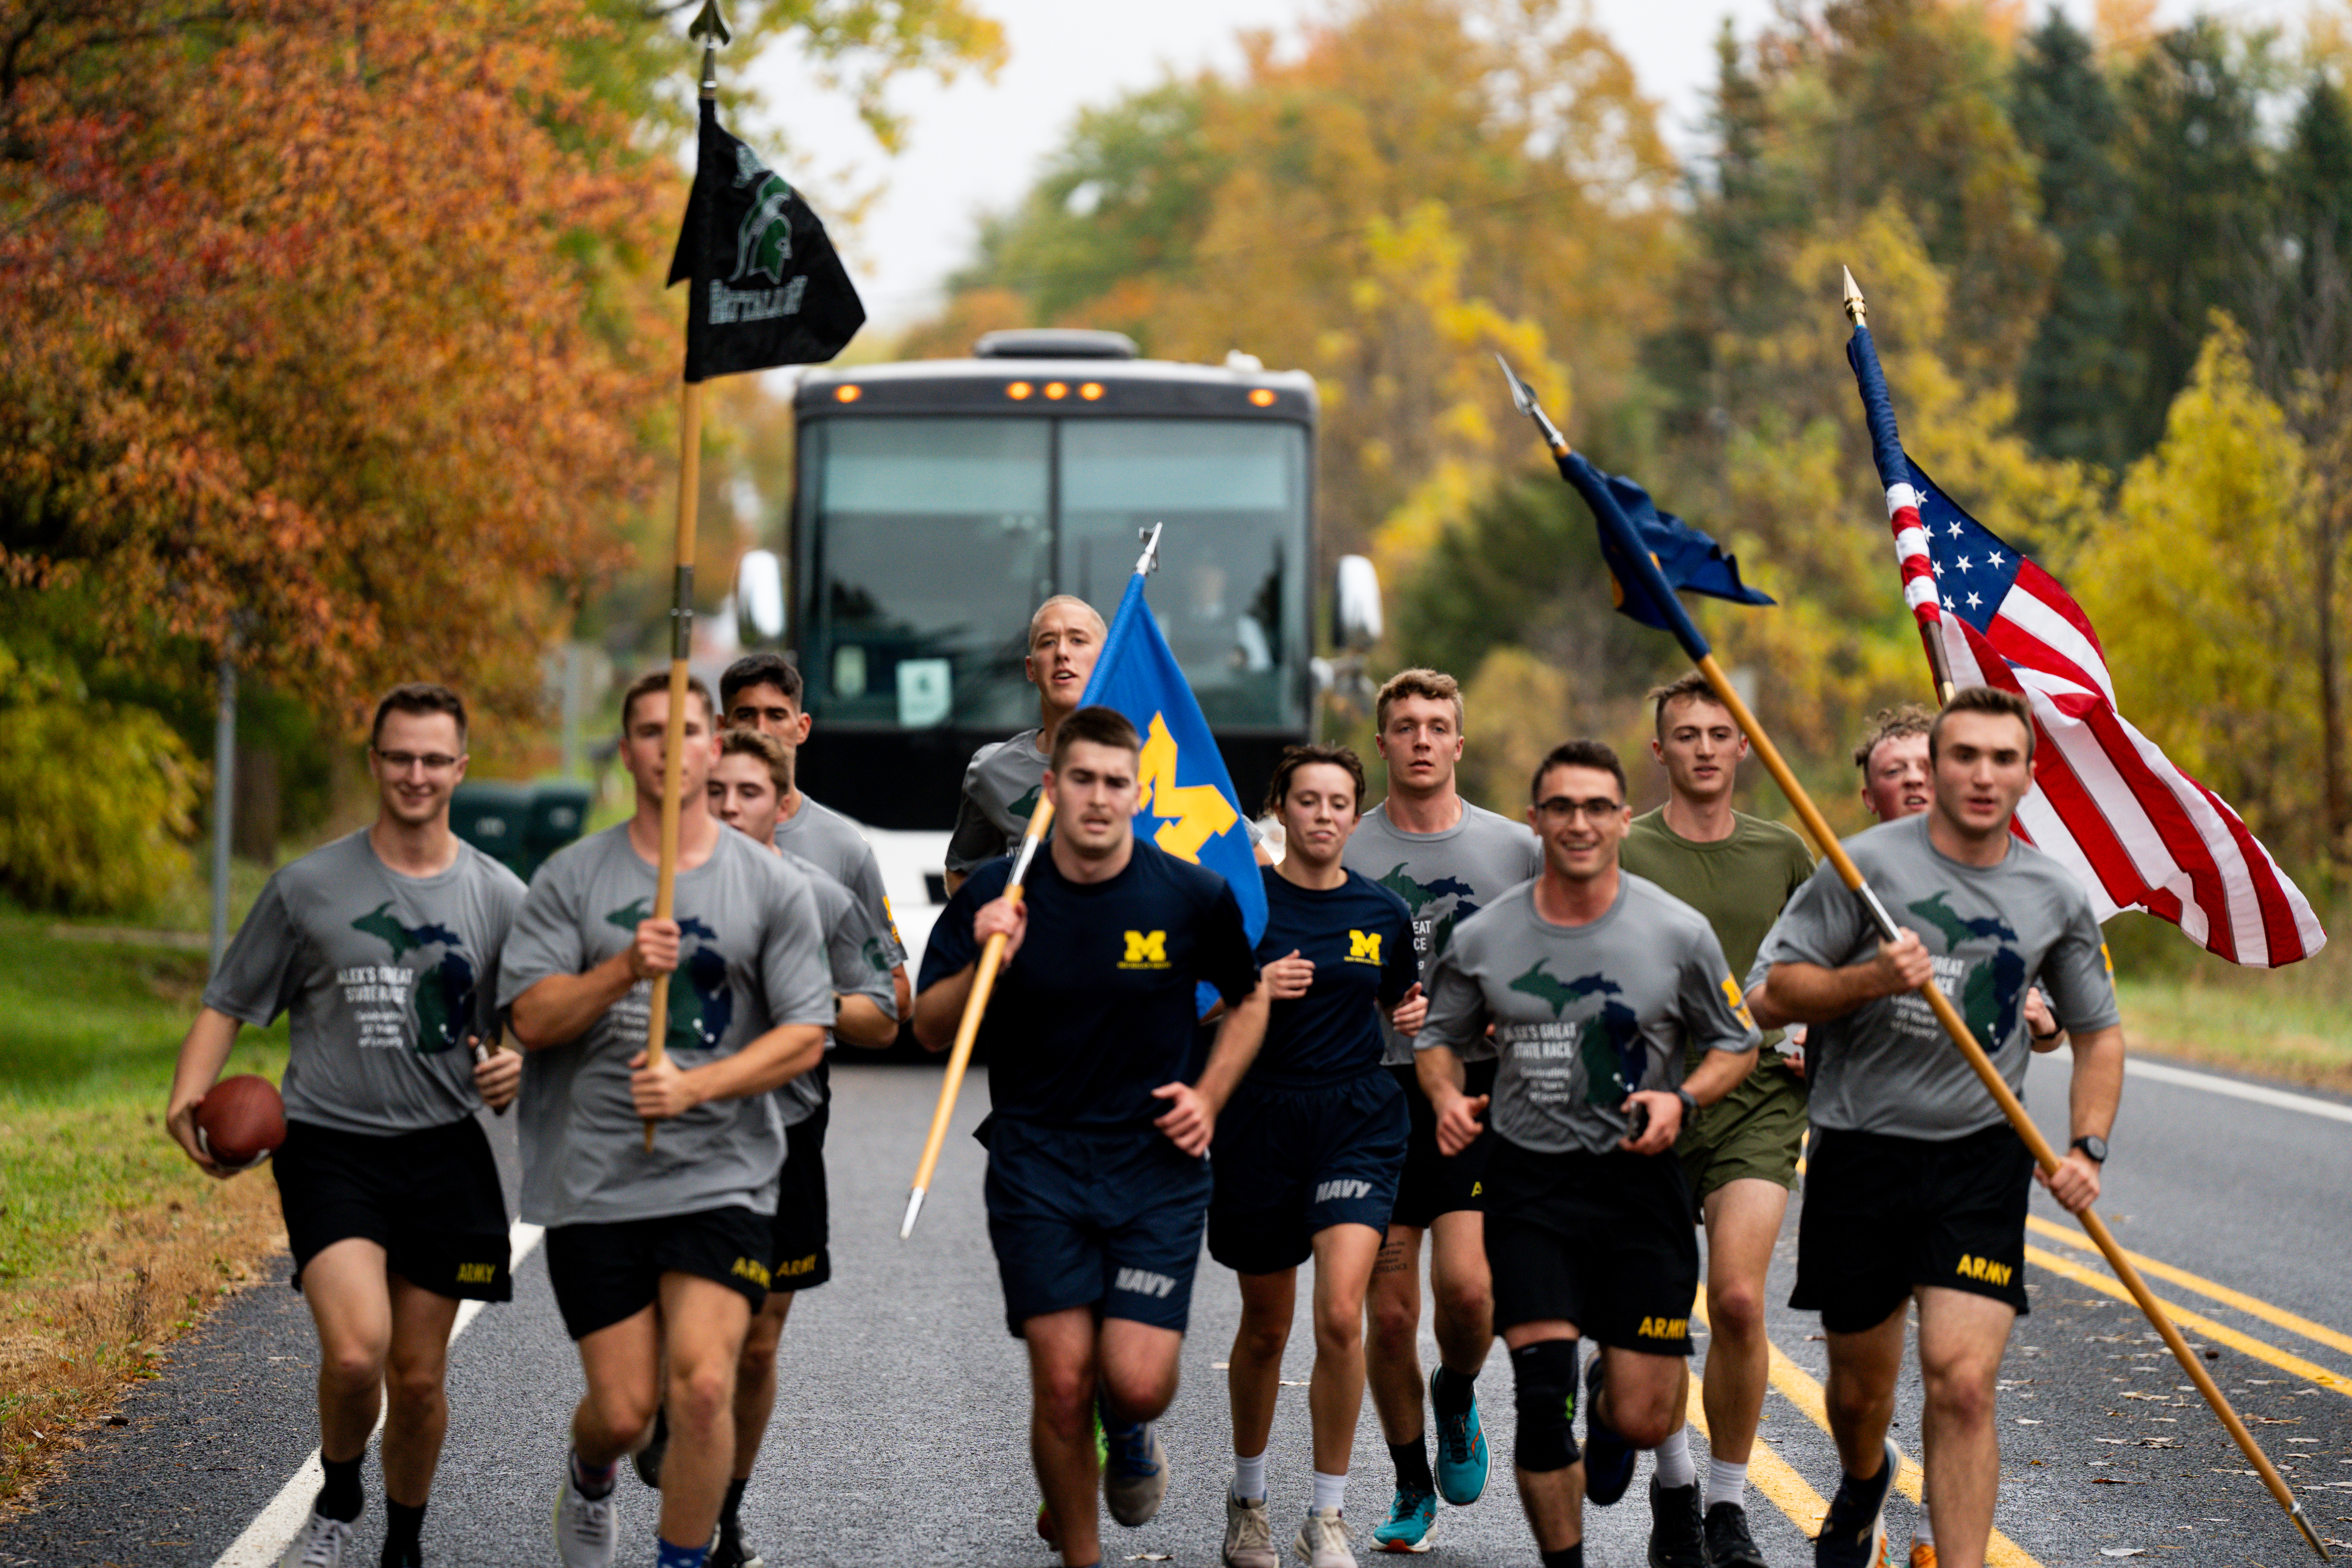 Cadets running in front of AGSR bus carrying the US flag